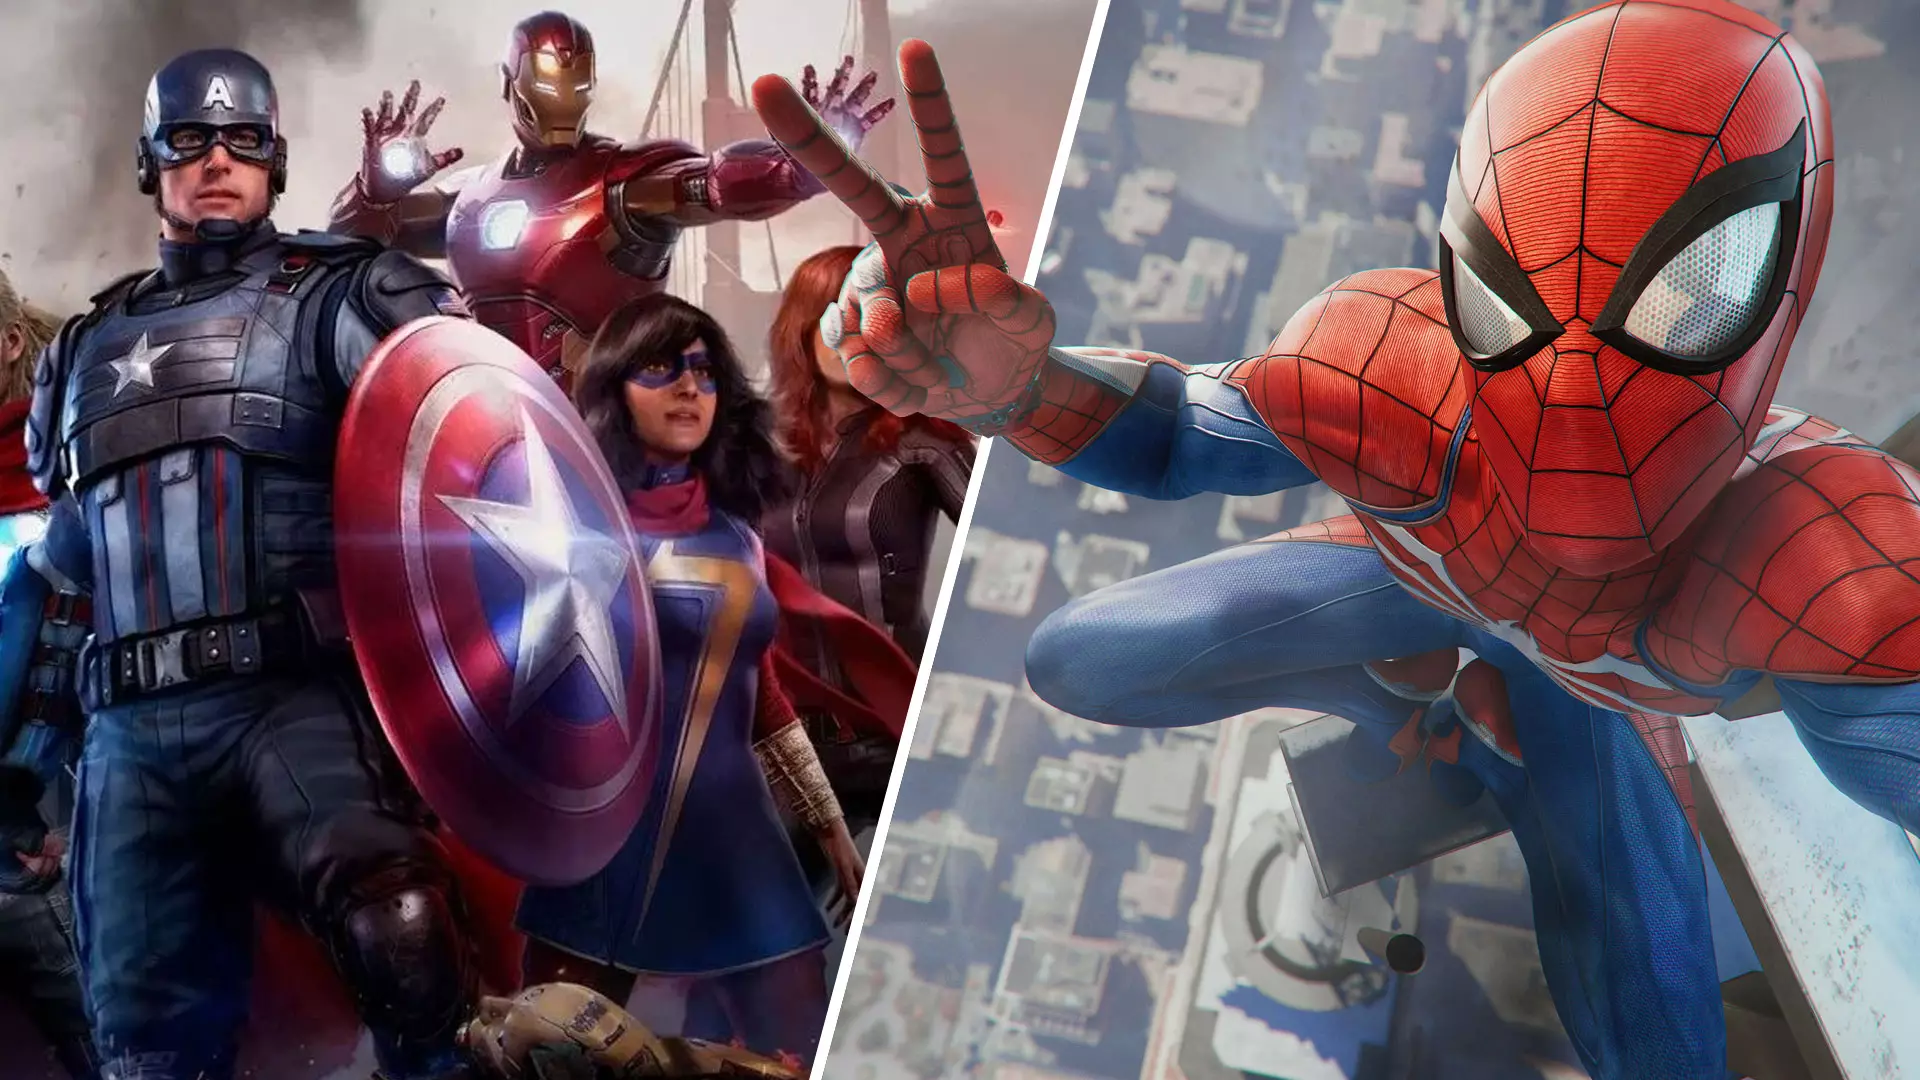 ‘Marvel’s Avengers’ Will Include Spider-Man, But Only For PlayStation Players